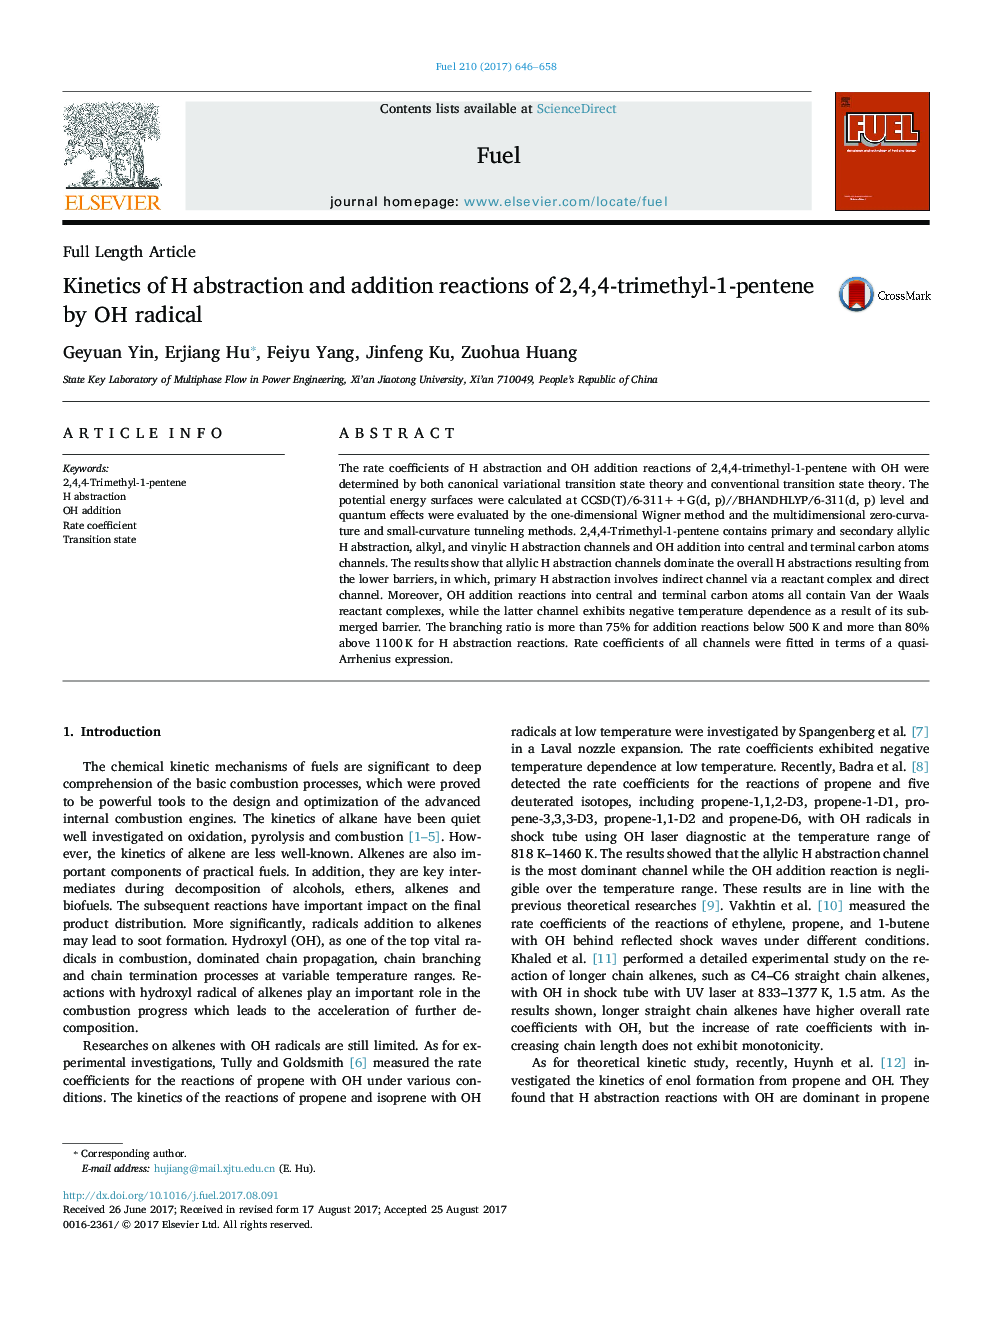 Kinetics of H abstraction and addition reactions of 2,4,4-trimethyl-1-pentene by OH radical